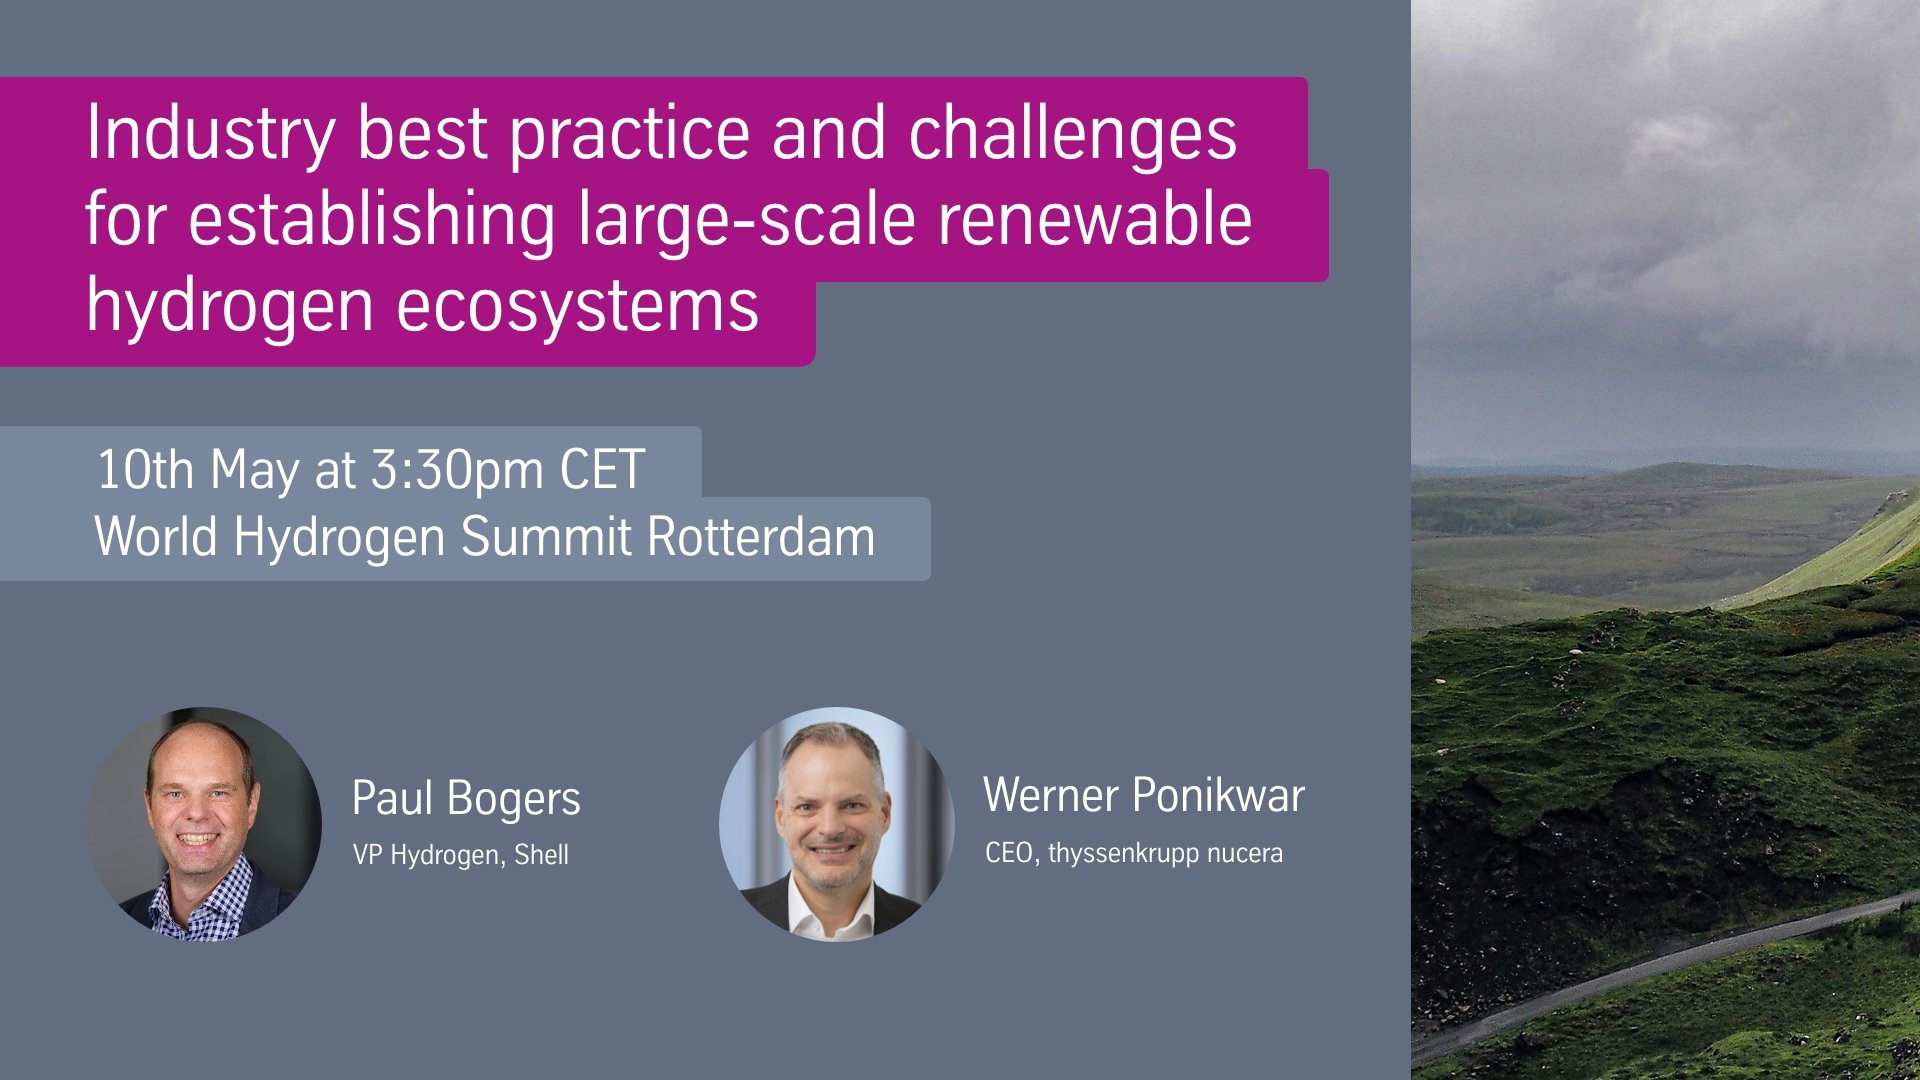 Industry best practice and challenges for establishing large-scale renewable hydrogen ecosystems